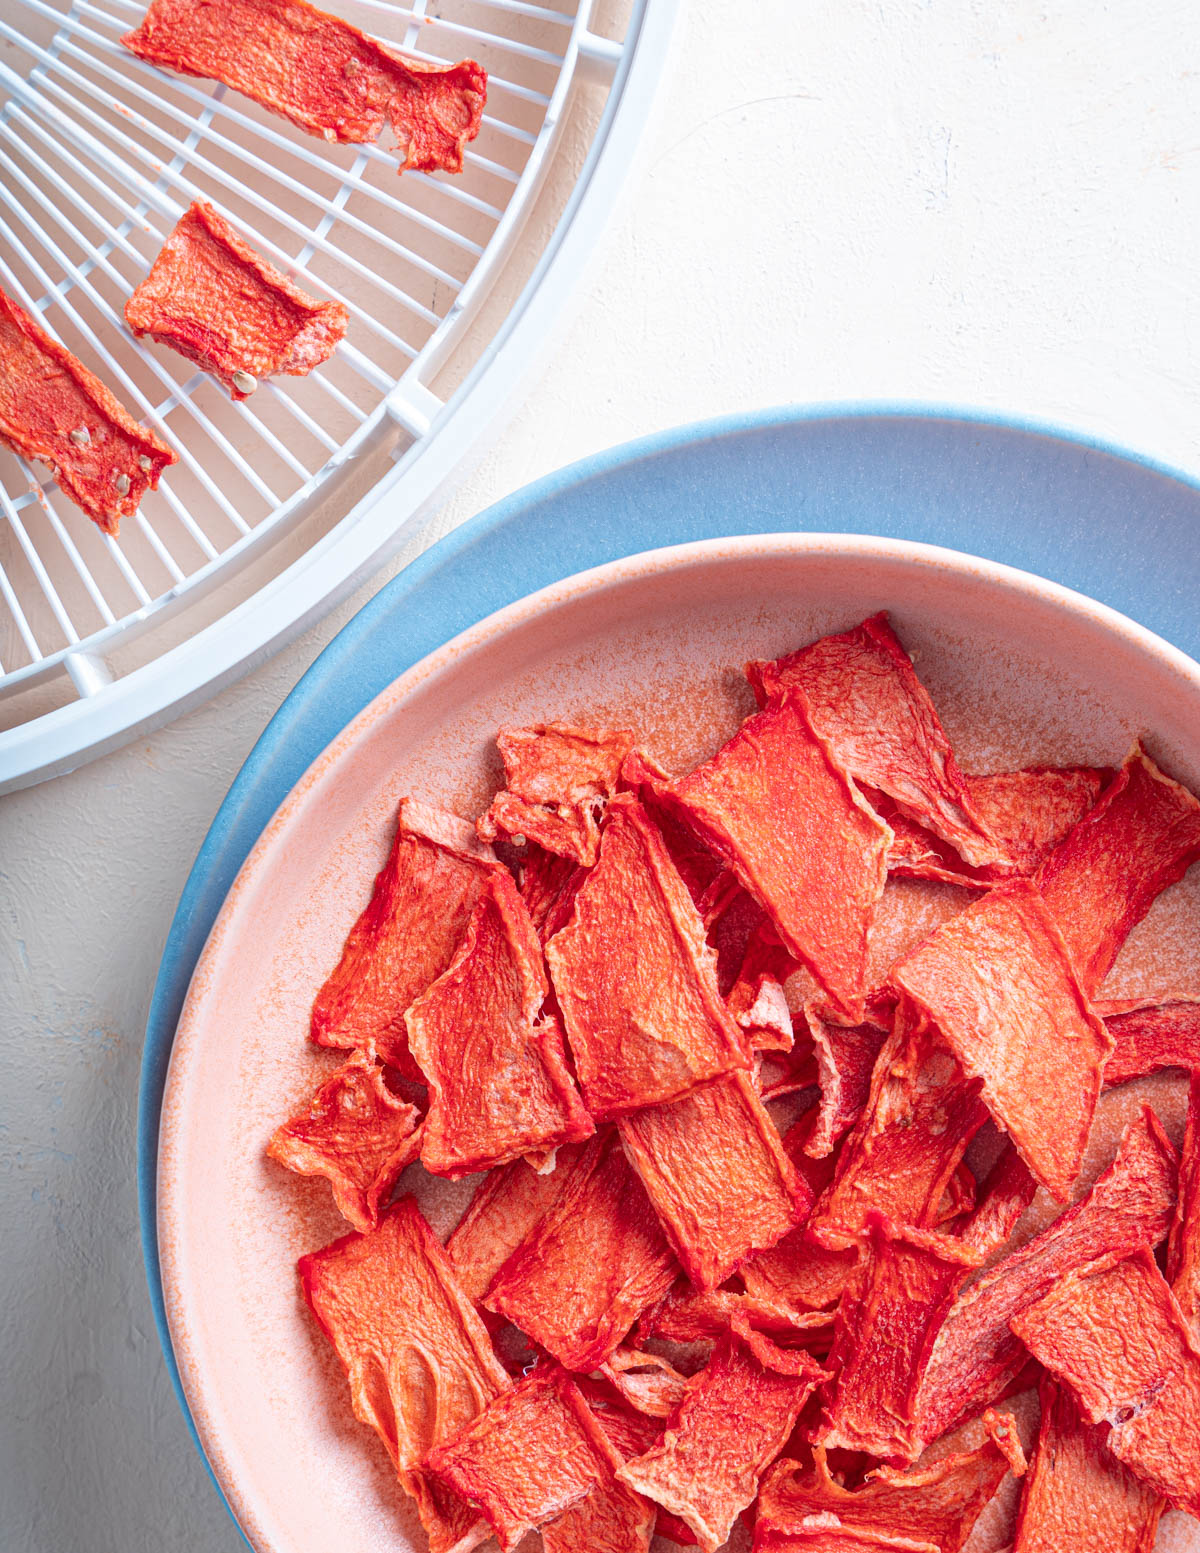 Top down view of dehydrated watermelon on a pink plate over top a larger blue plate. A dehydrator tray with dehydrated watermelon is above the plate to the left.